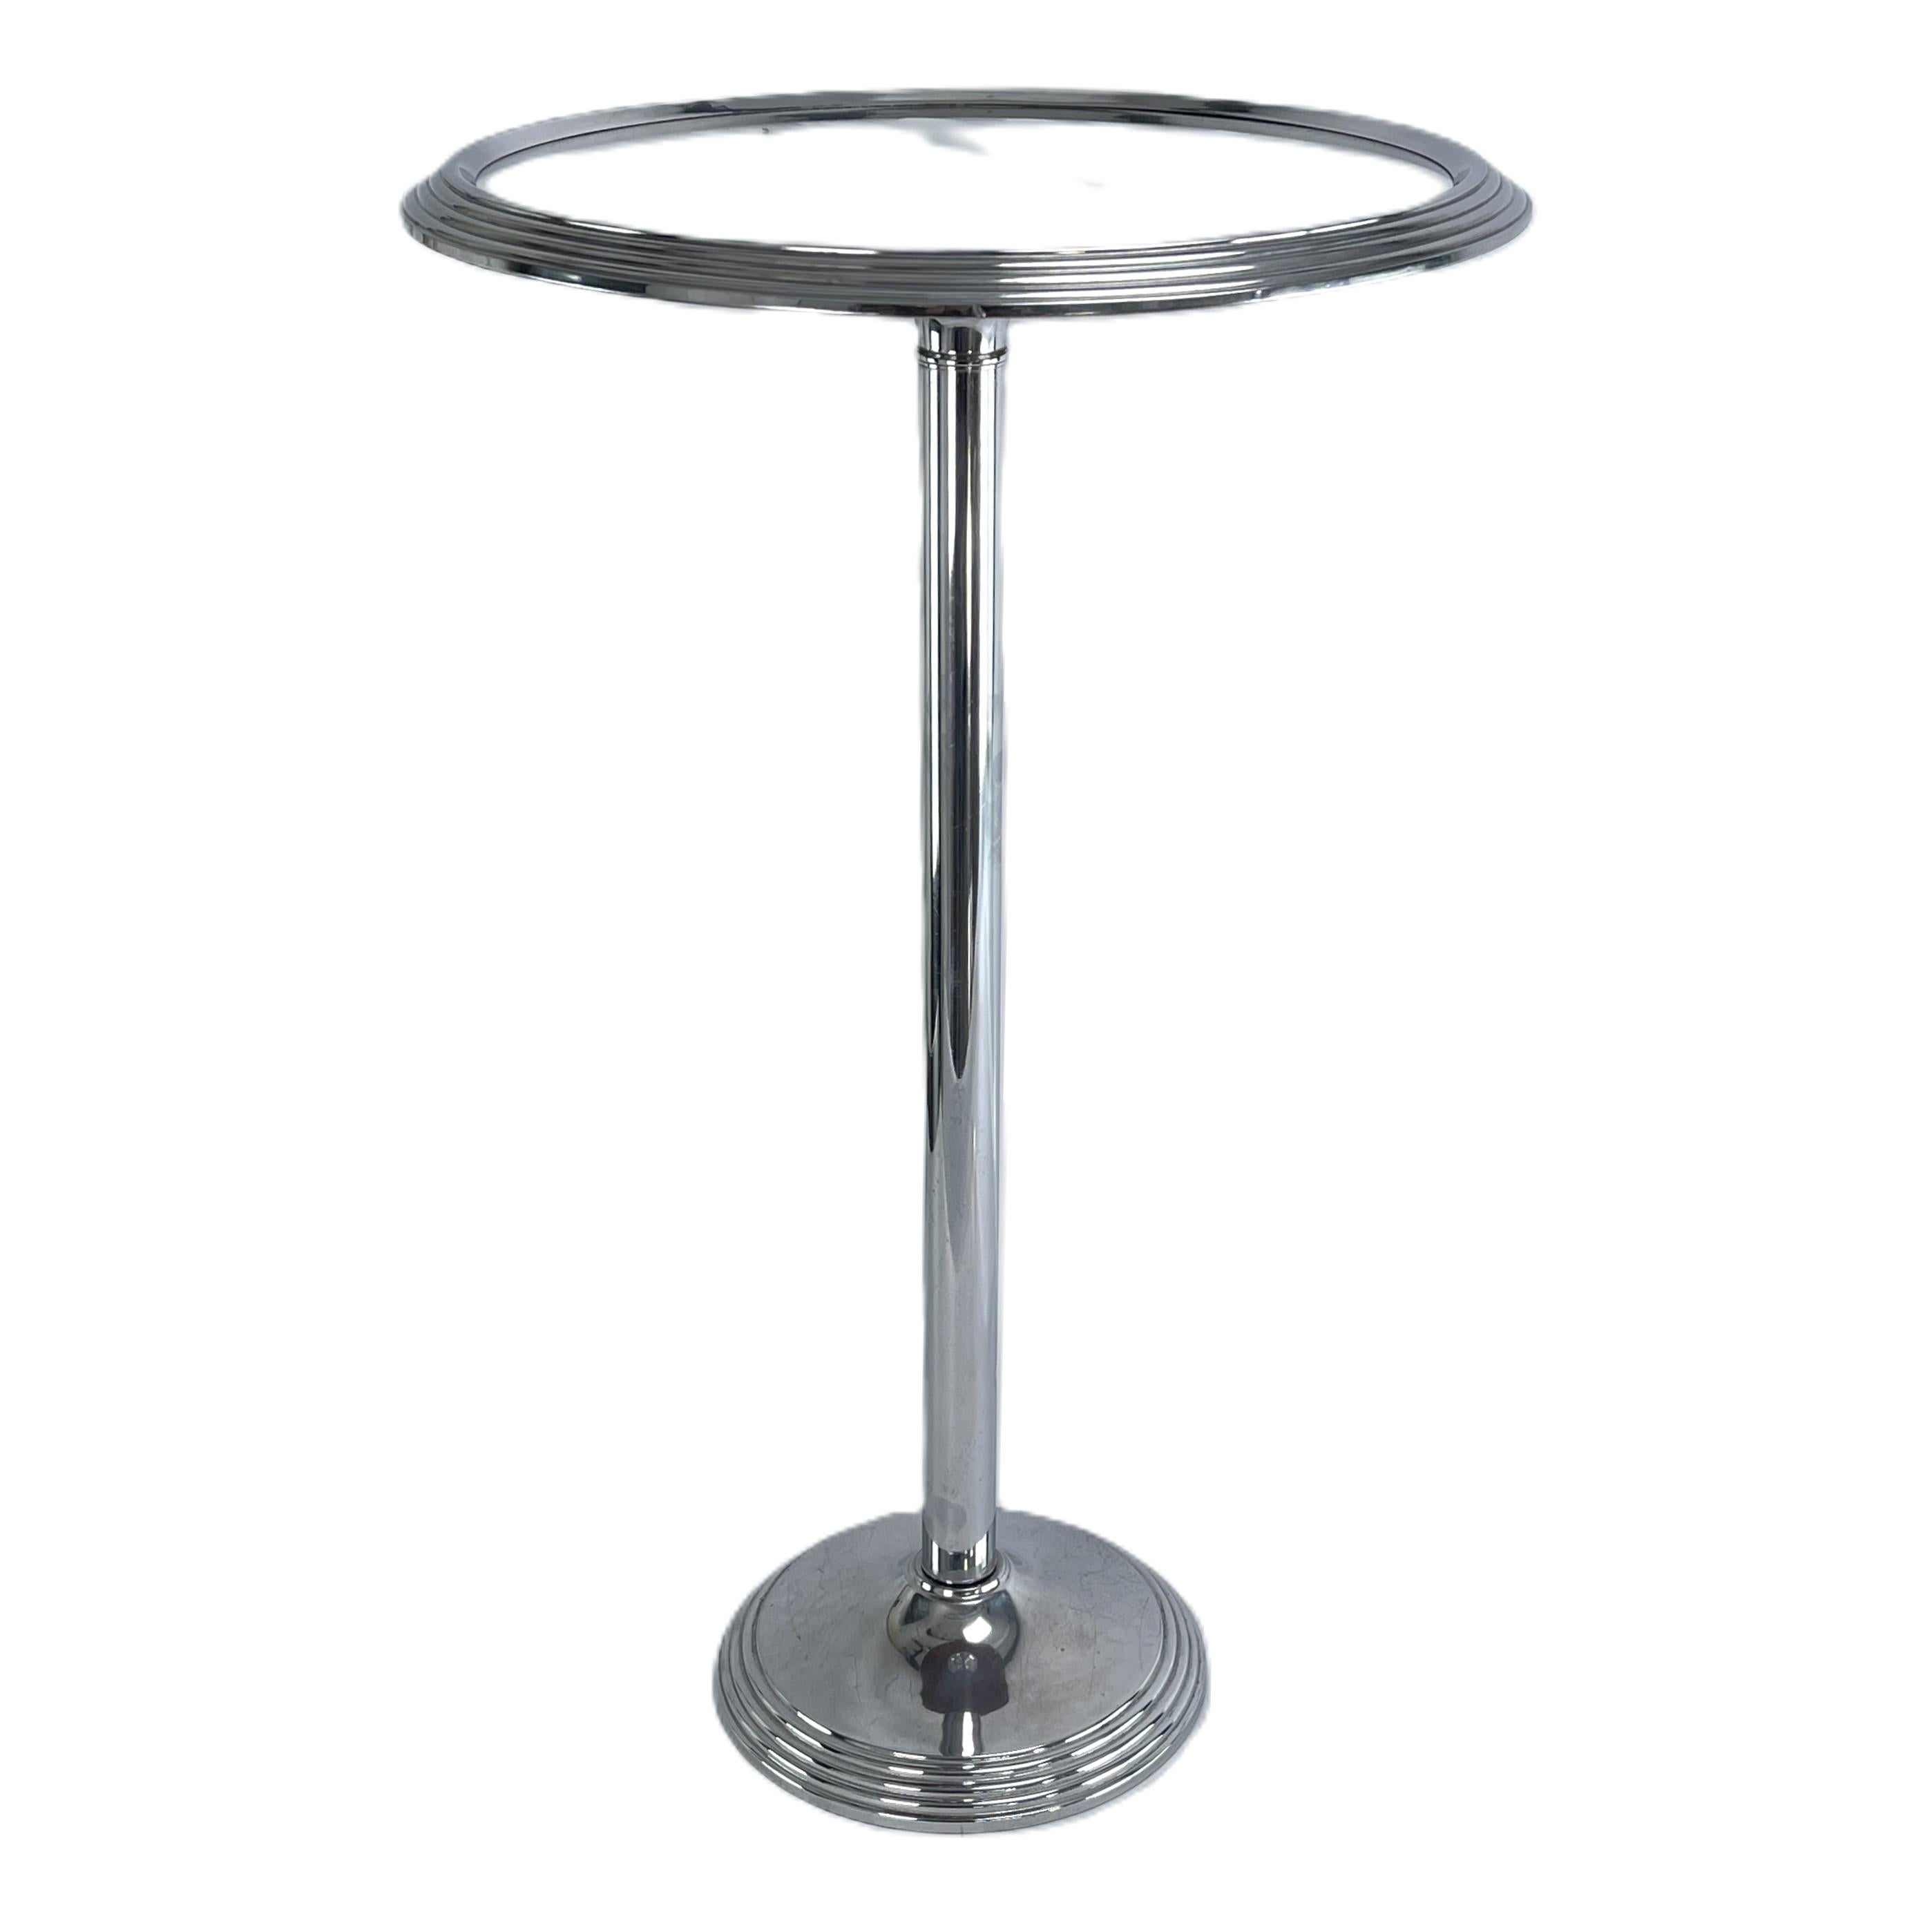 art deco side table - 1930s.

This beautiful, round side table from the 1930s is in the streamline modernist style of Art Deco. The coffee table emphasizes curvy, streamlined shapes.

The cleaned item weights 2.5 kg / 5.51 lbs.